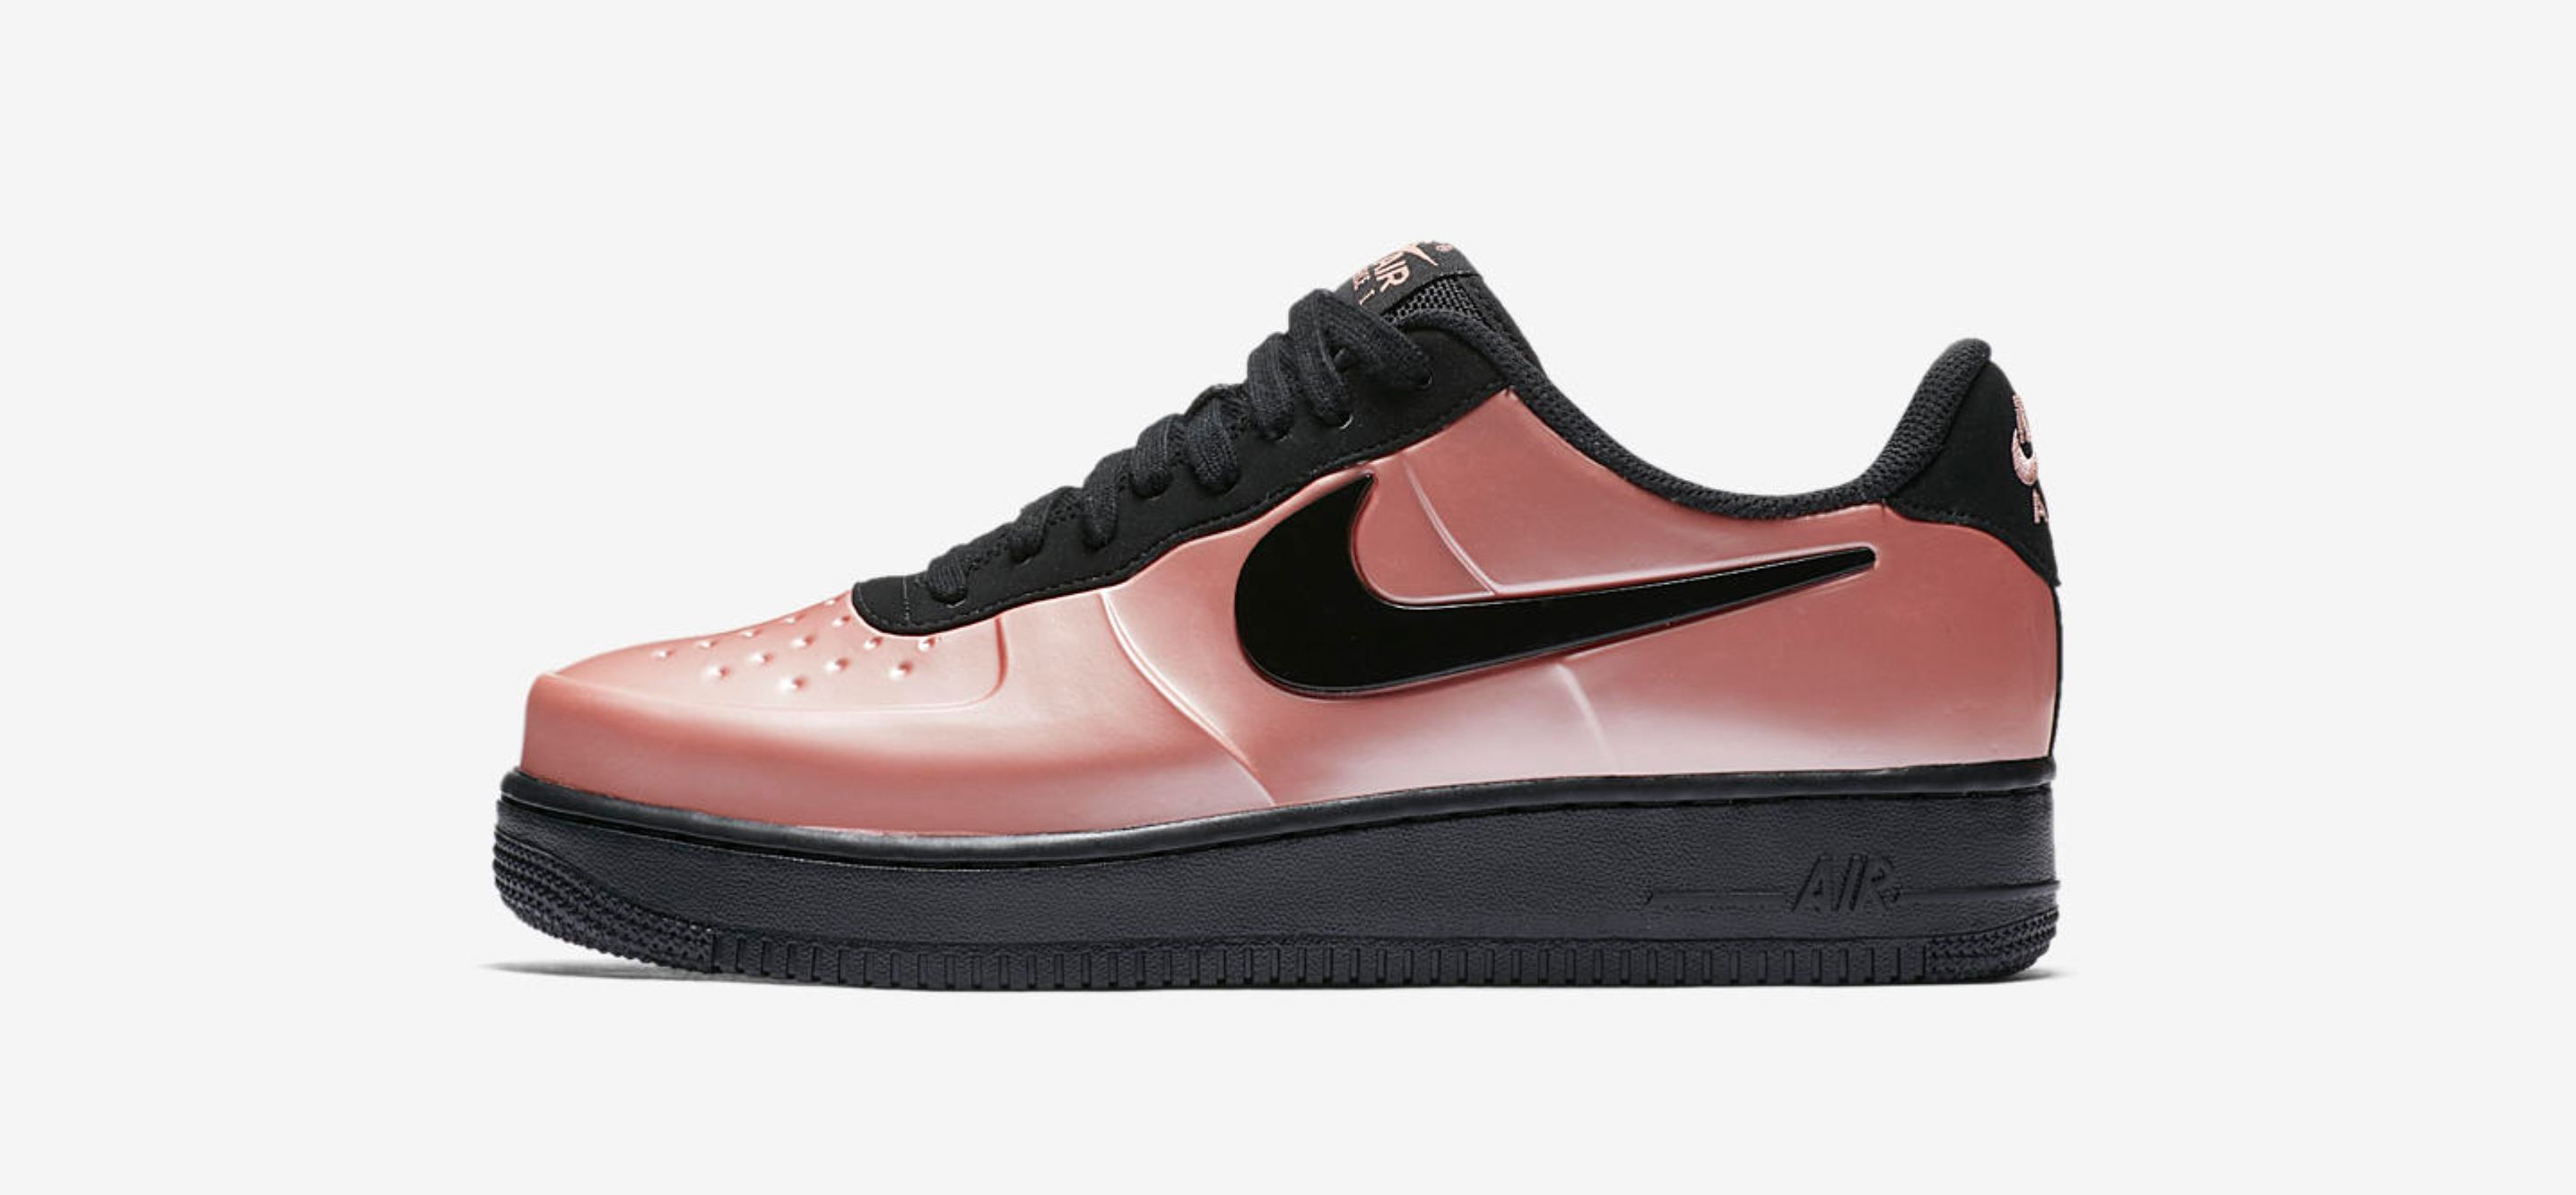 The Nike Air Force 1 Foamposite Pro Cup 